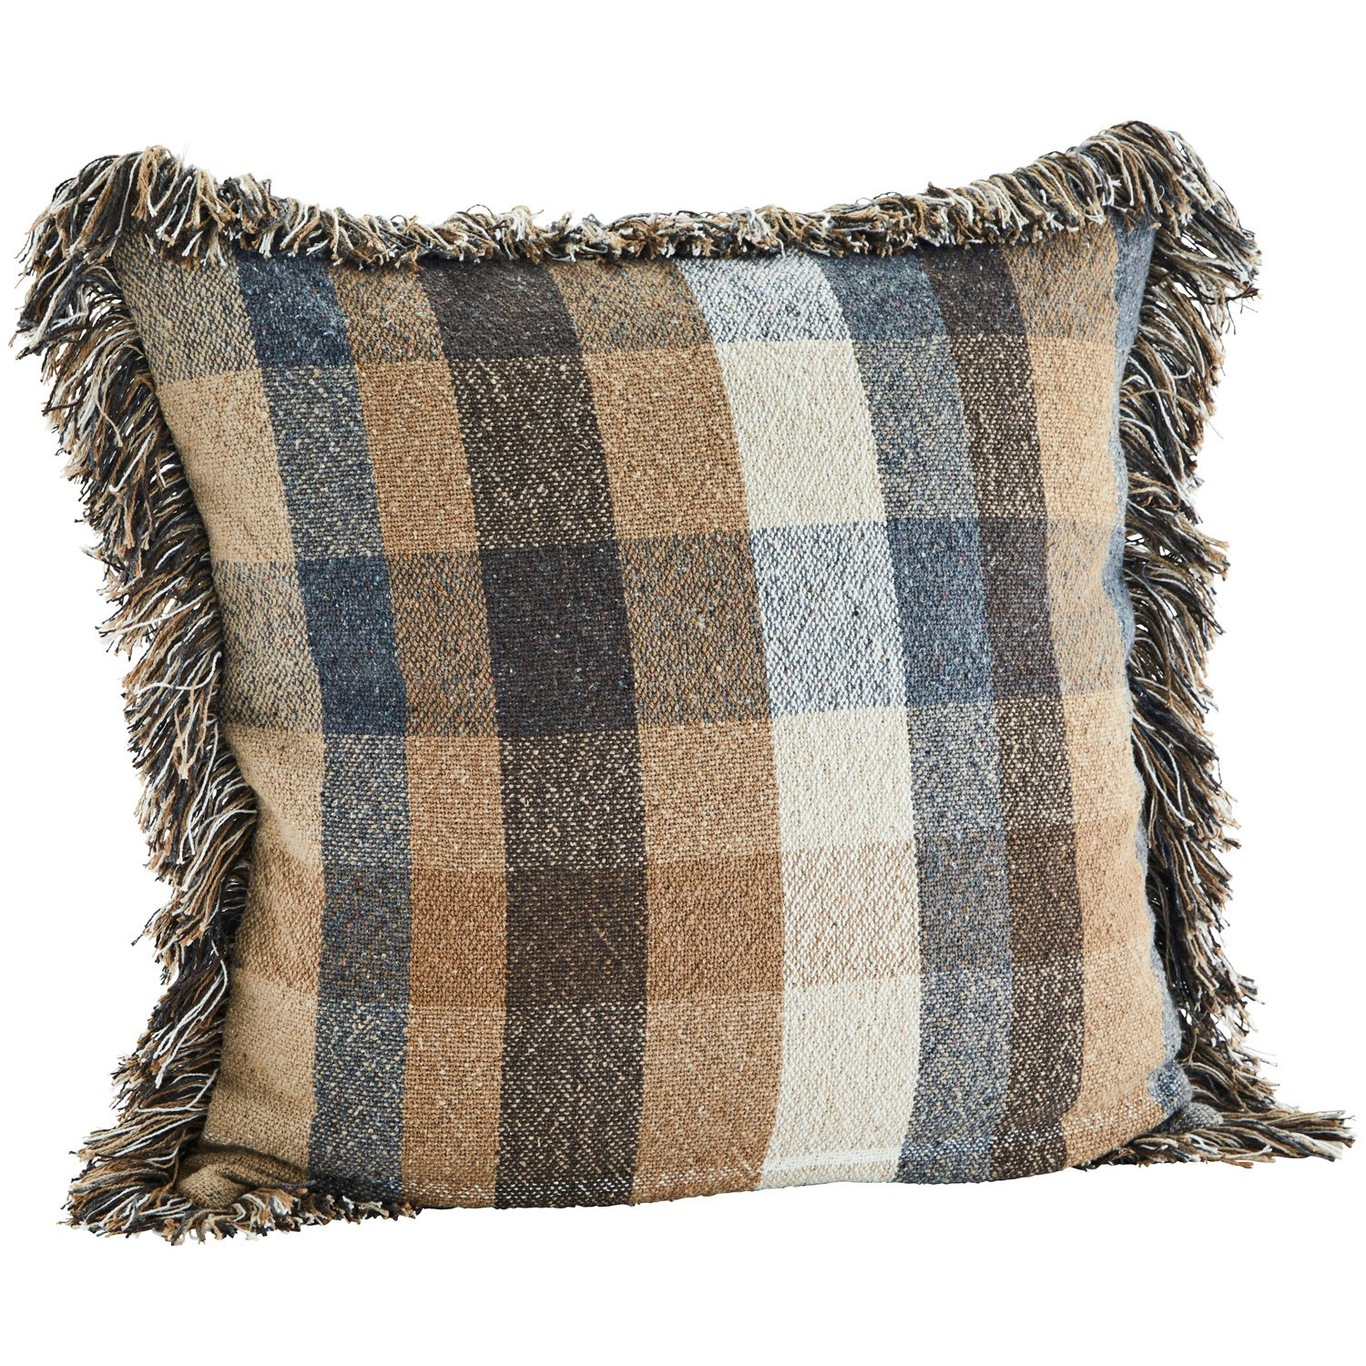 Cushion Cover Recycled Cotton 60x60 cm, Camel